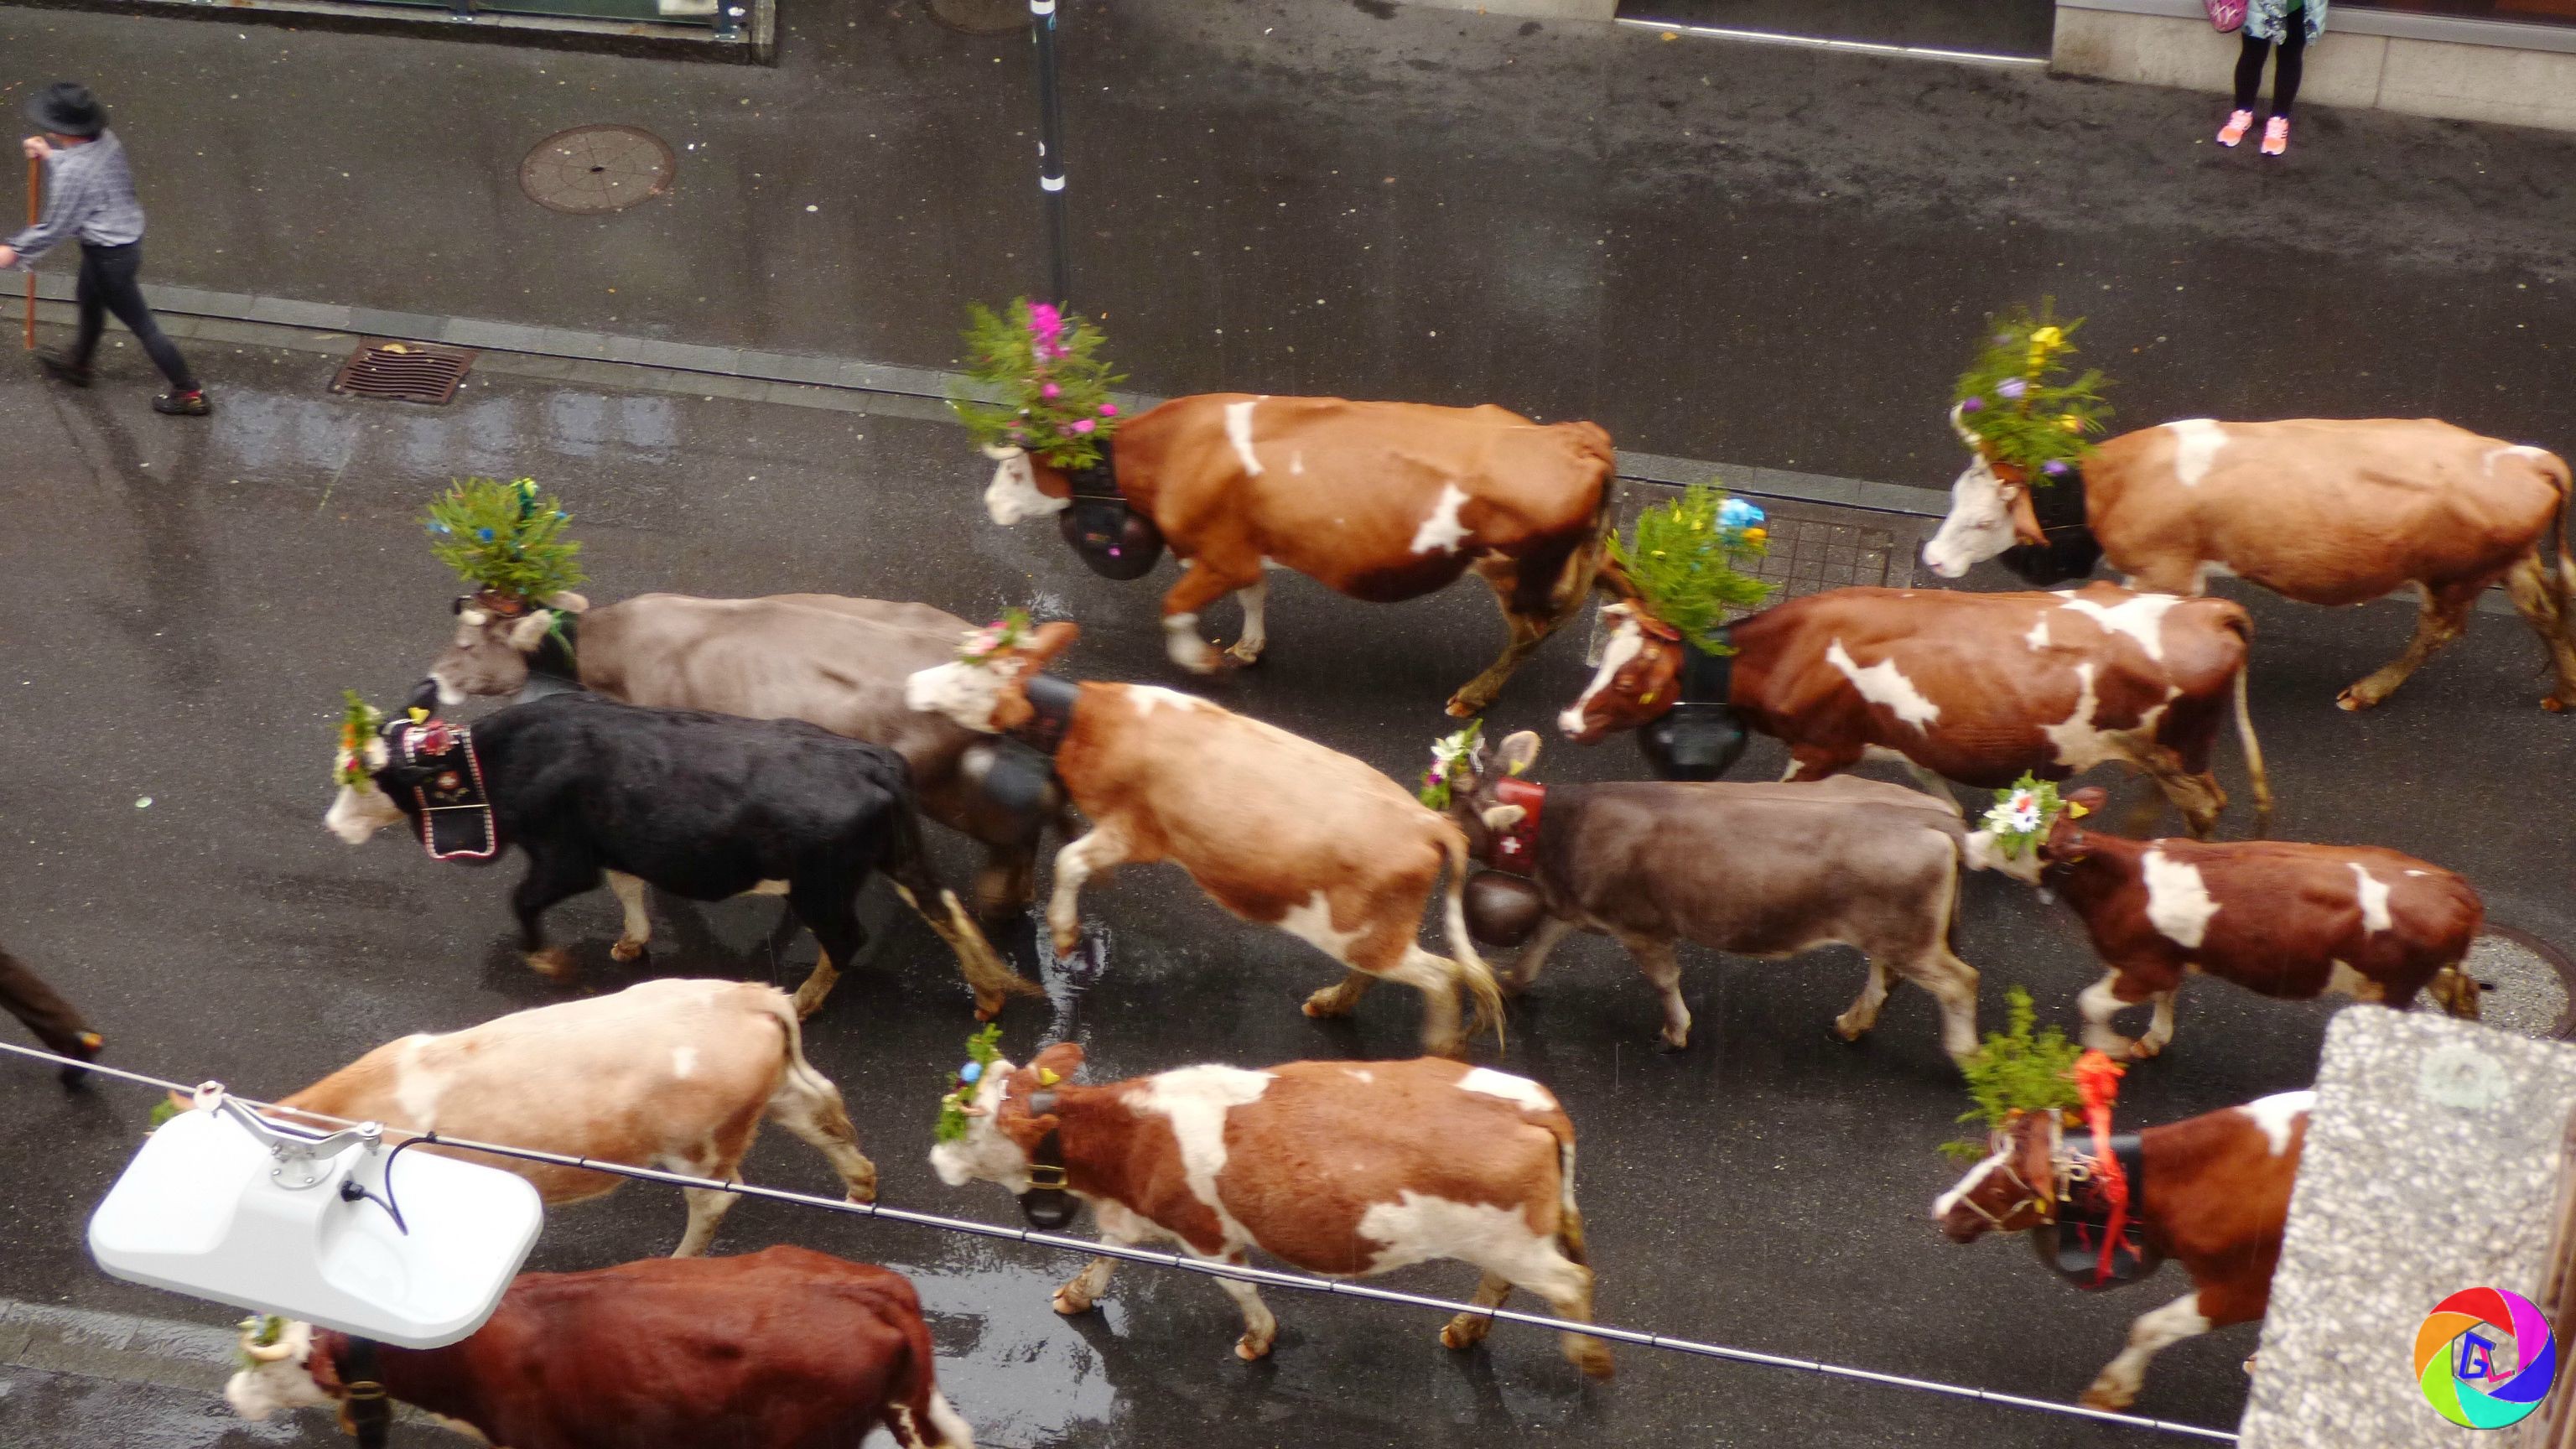 Cattle herded through city